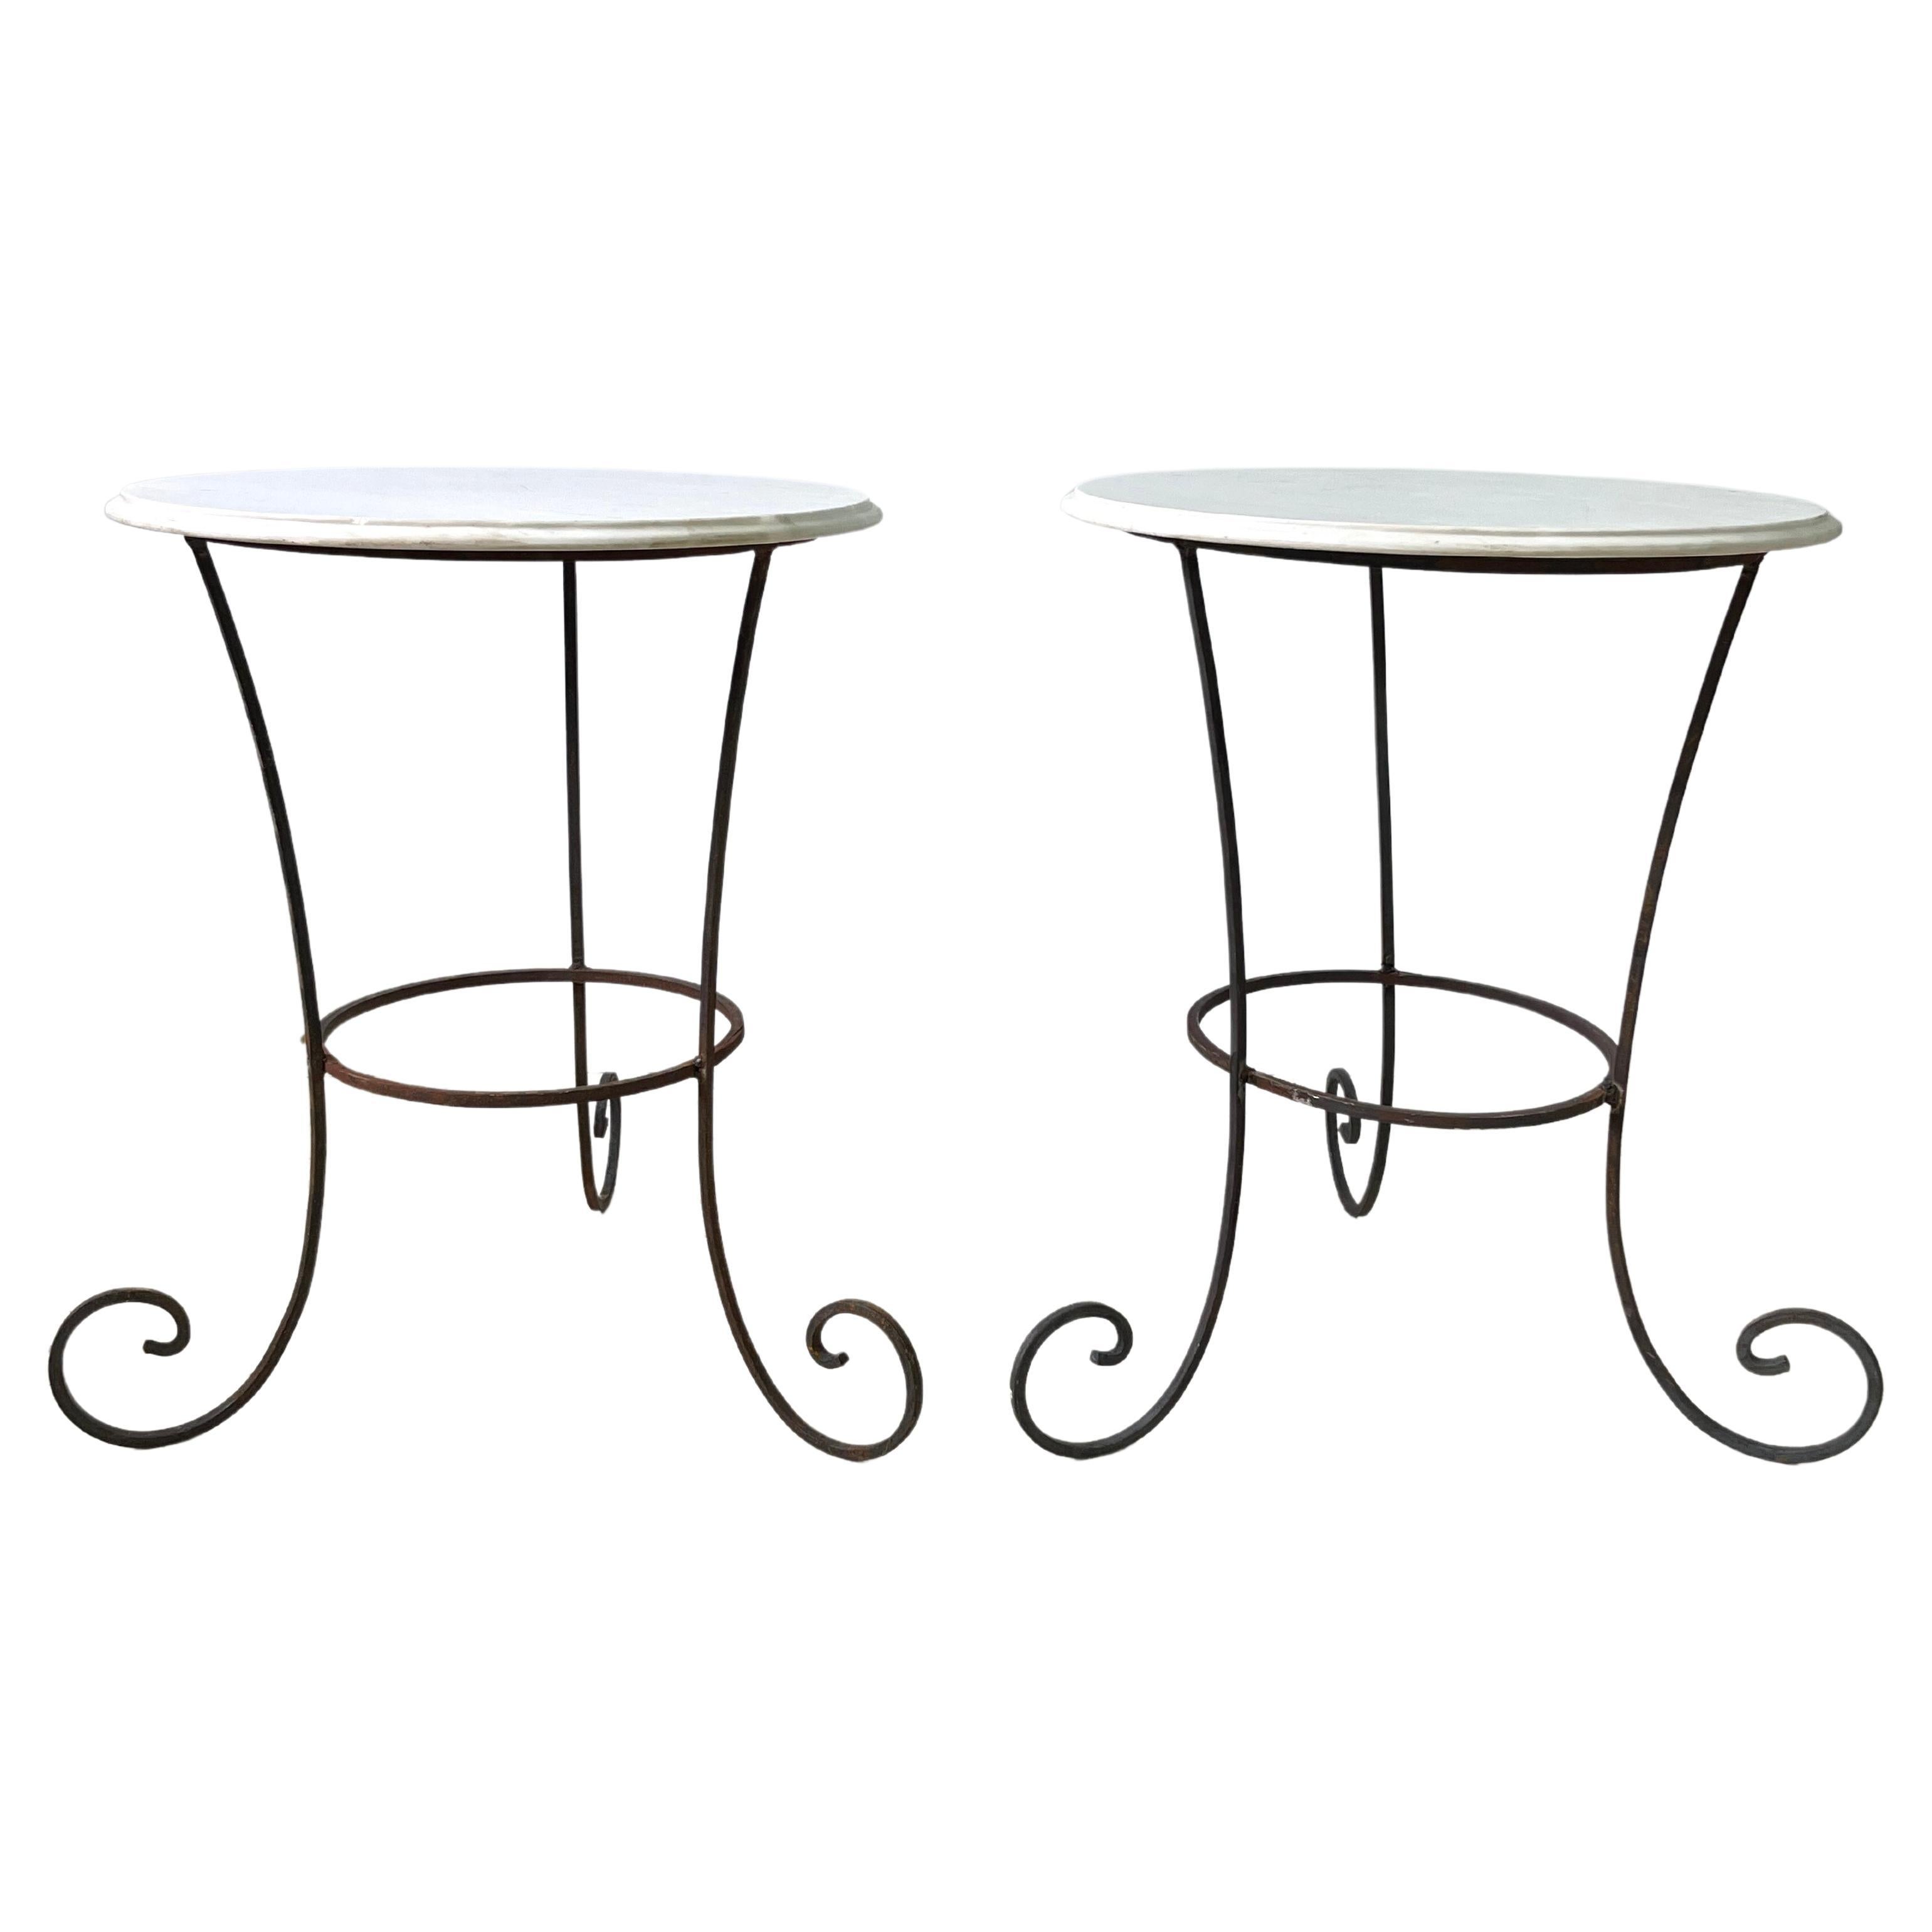 Vintage Pair of French Forged Iron Side Tables with White Marble Tops